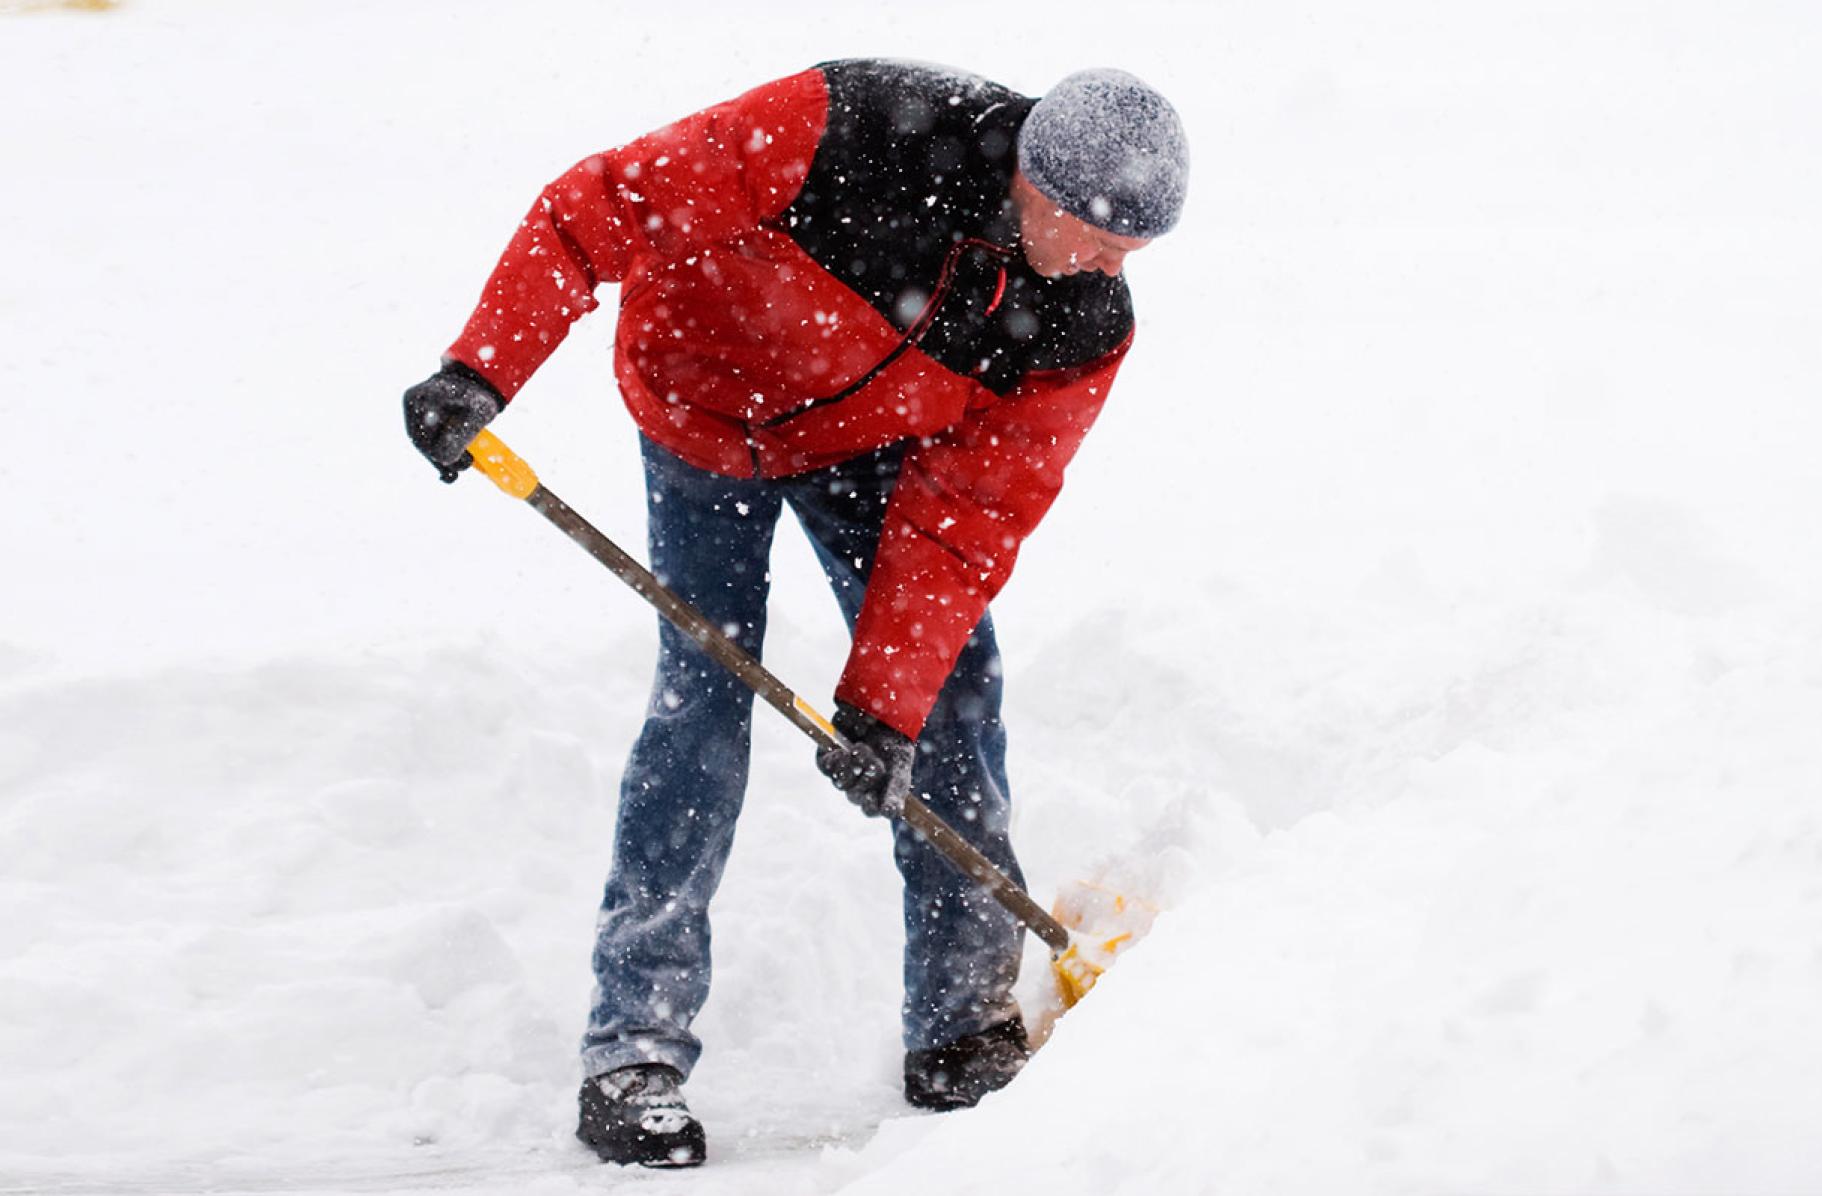 Avoid slips and falls during the winter